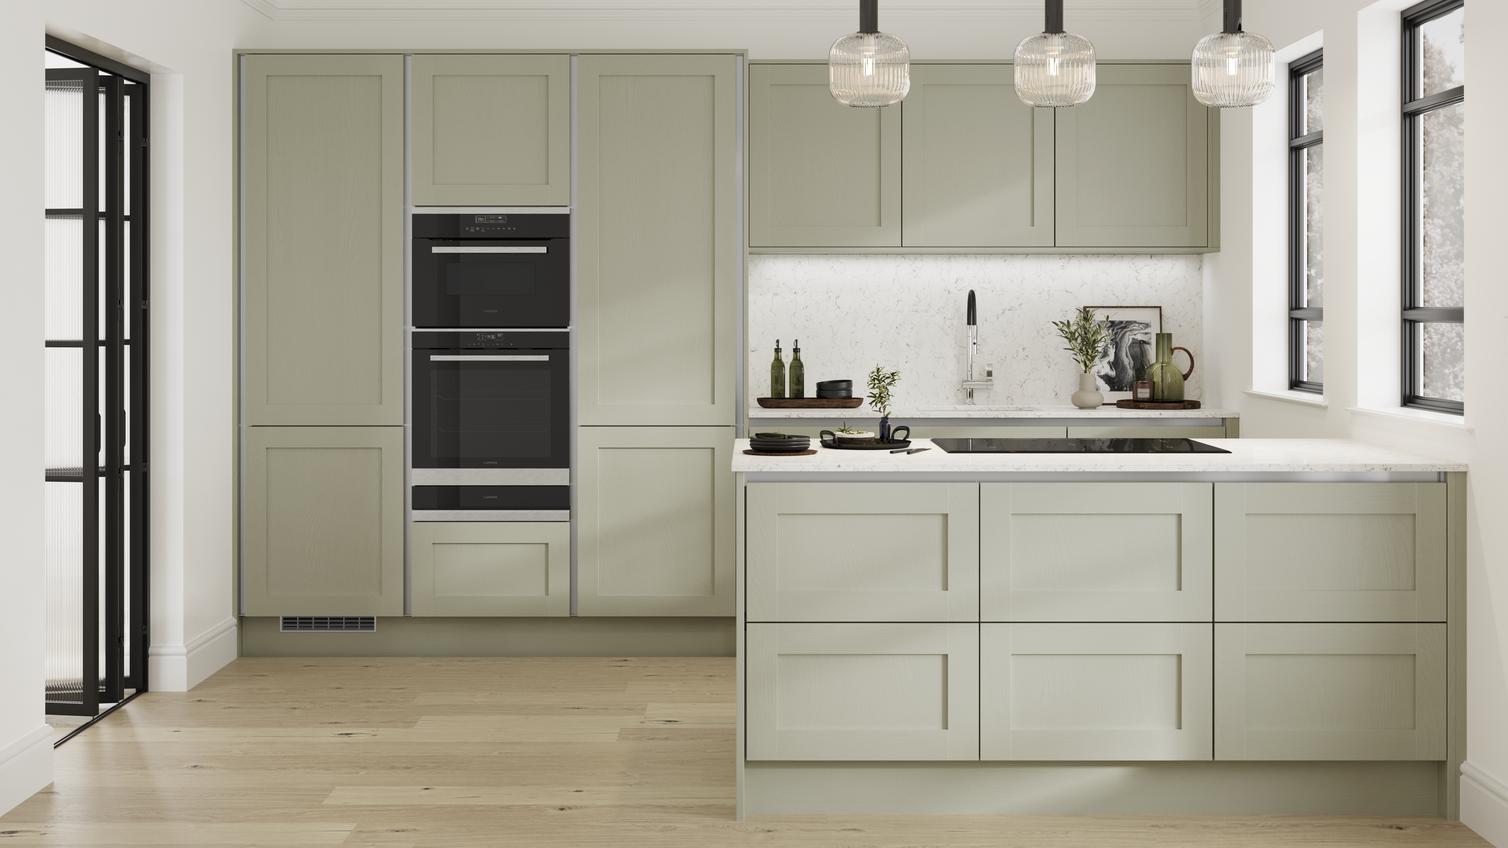 A shaker kitchen with sage-green doors, white worktops, black double oven, and silver profiles for a modern handleless look.